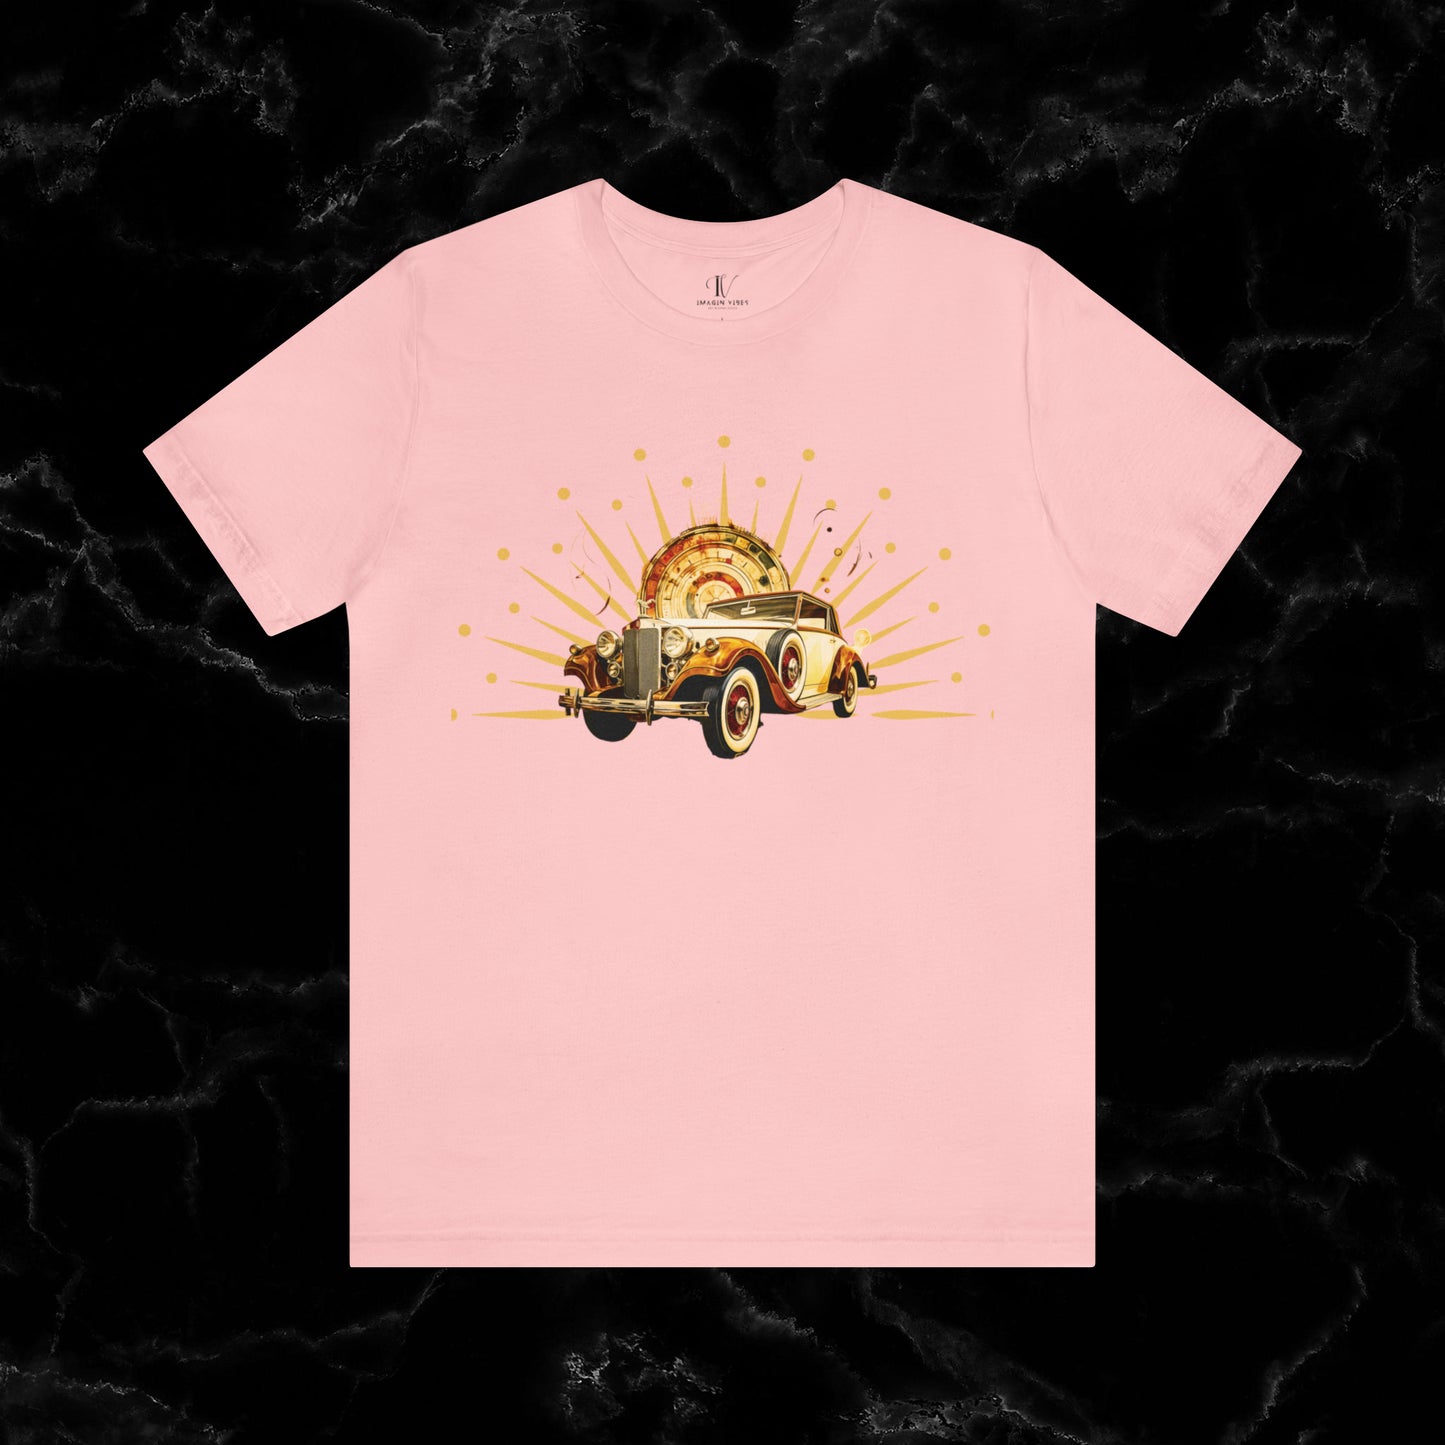 Vintage Car Enthusiast T-Shirt with Classic Wheels and Timeless Appeal Nostalgic T-Shirt Pink S 